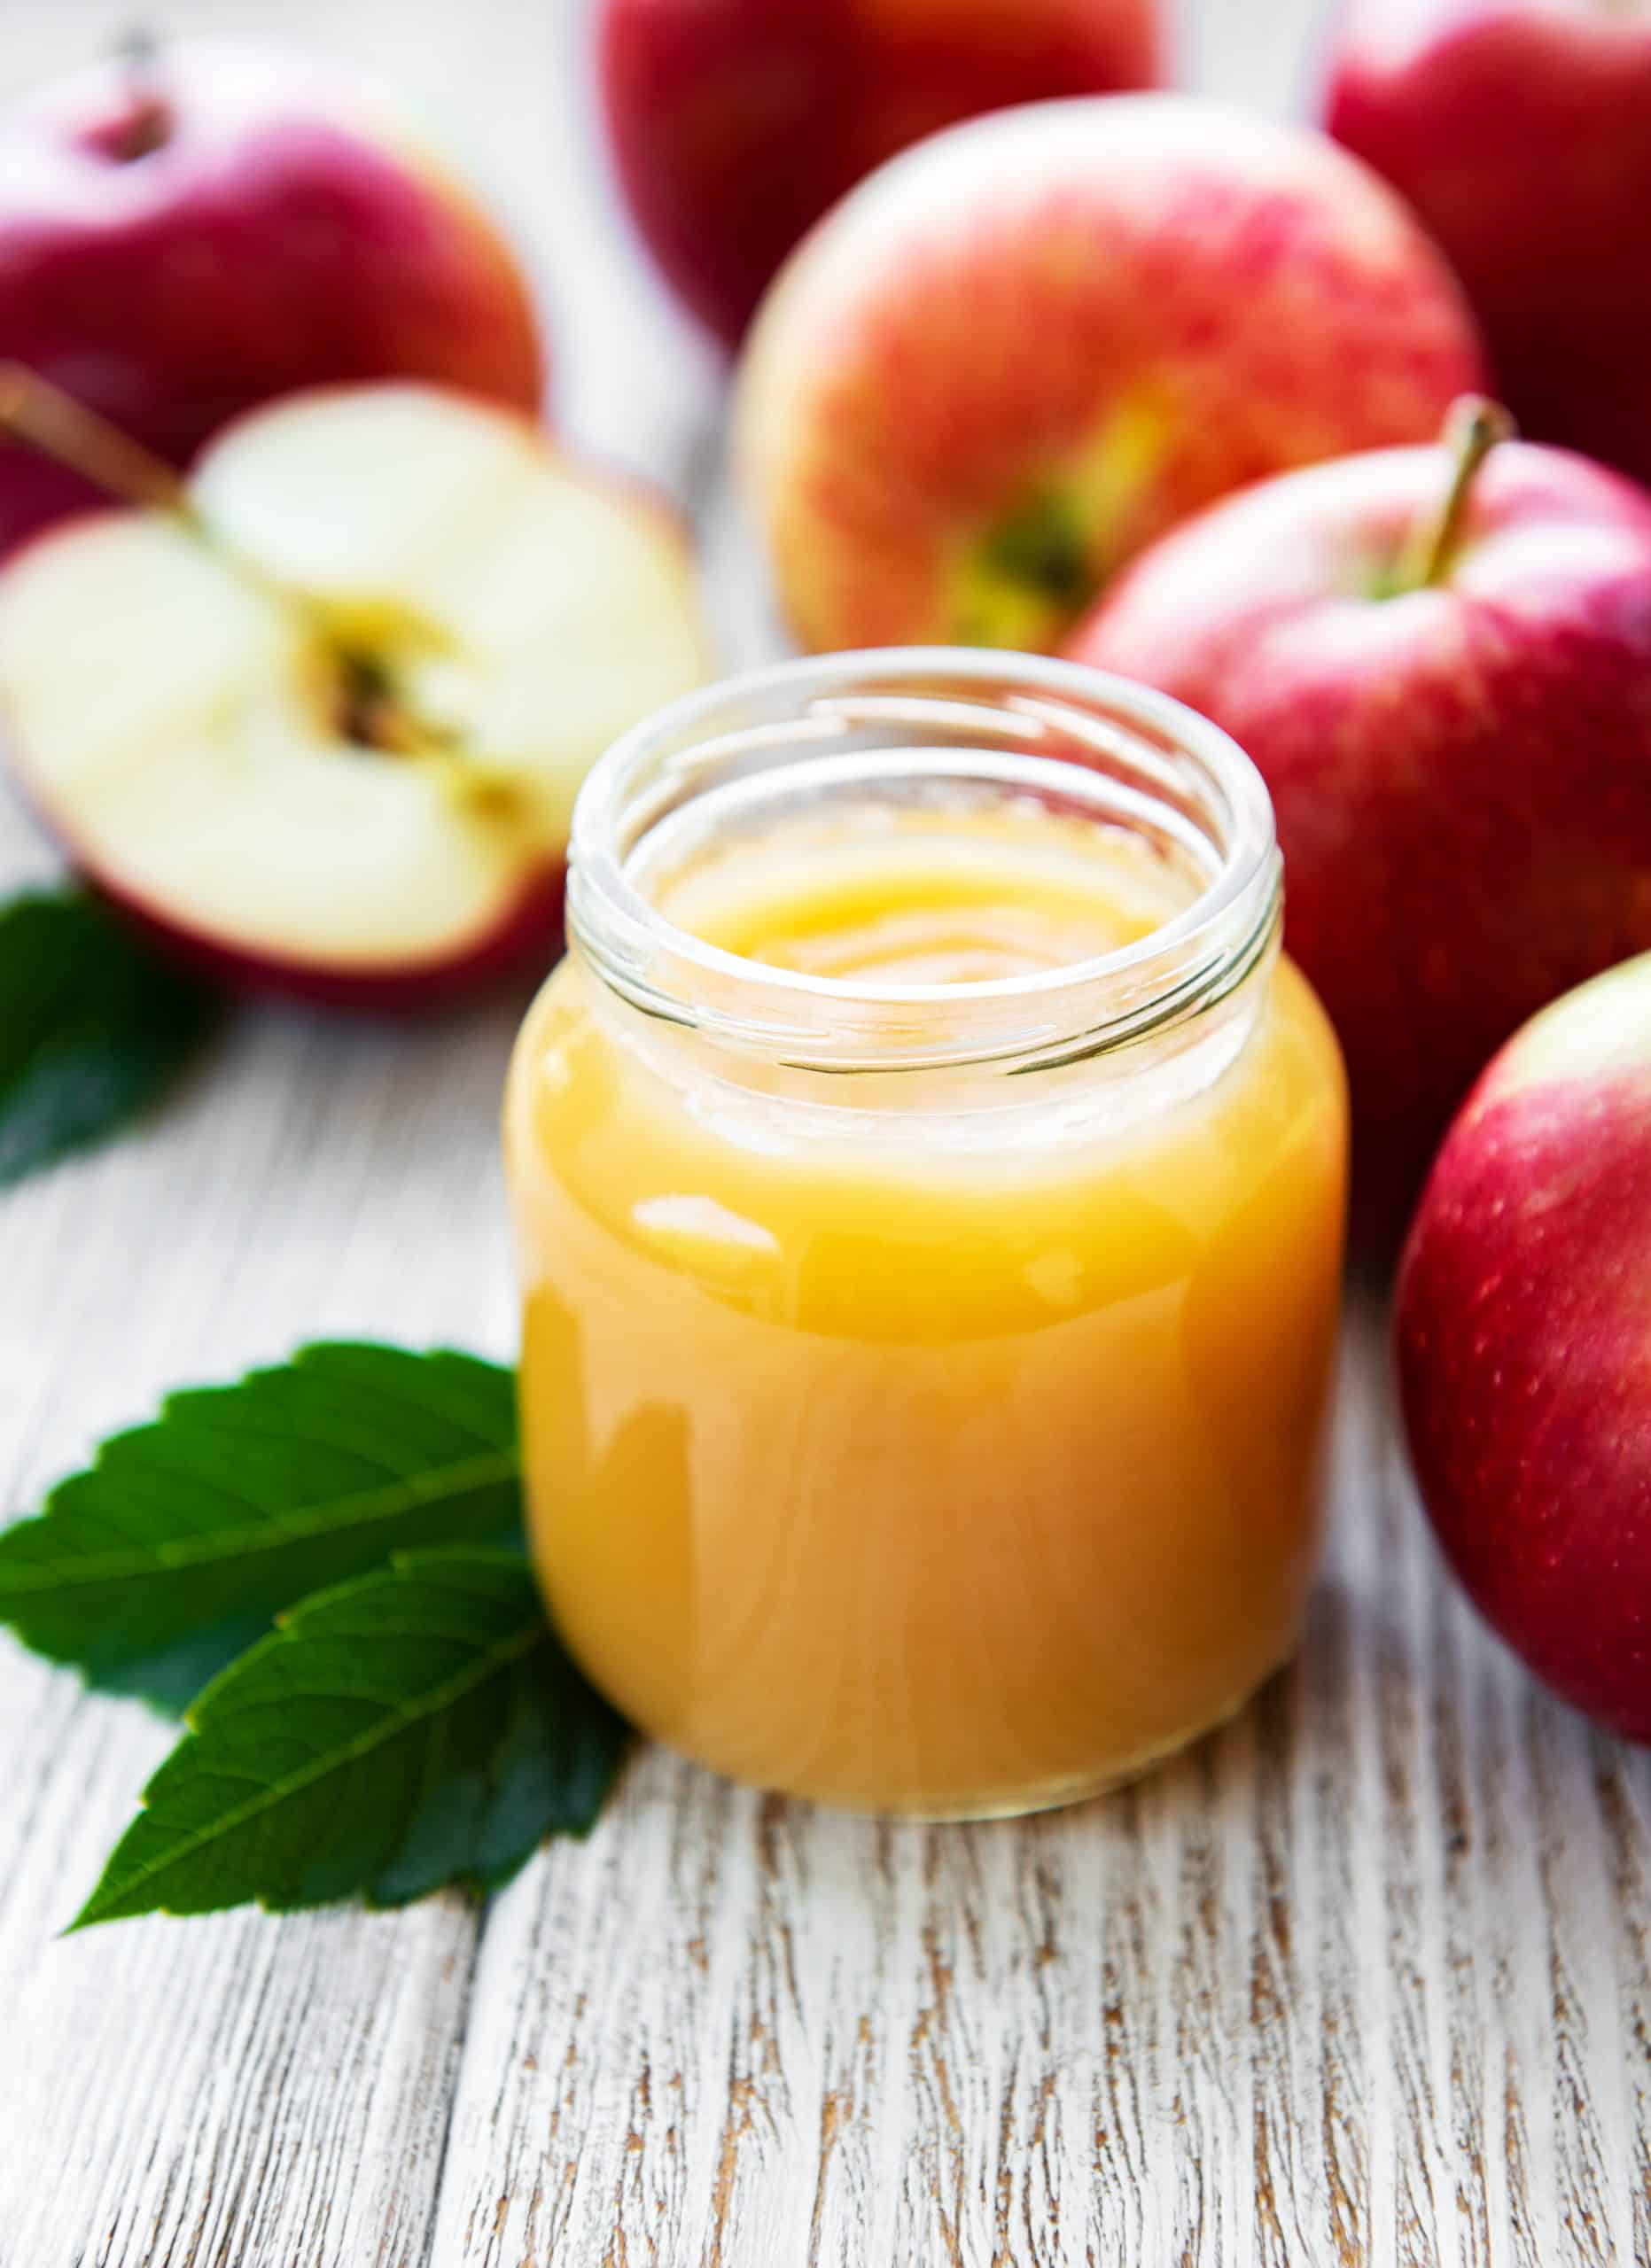 Applesauce in glass jar and fresh apples on a wooden table